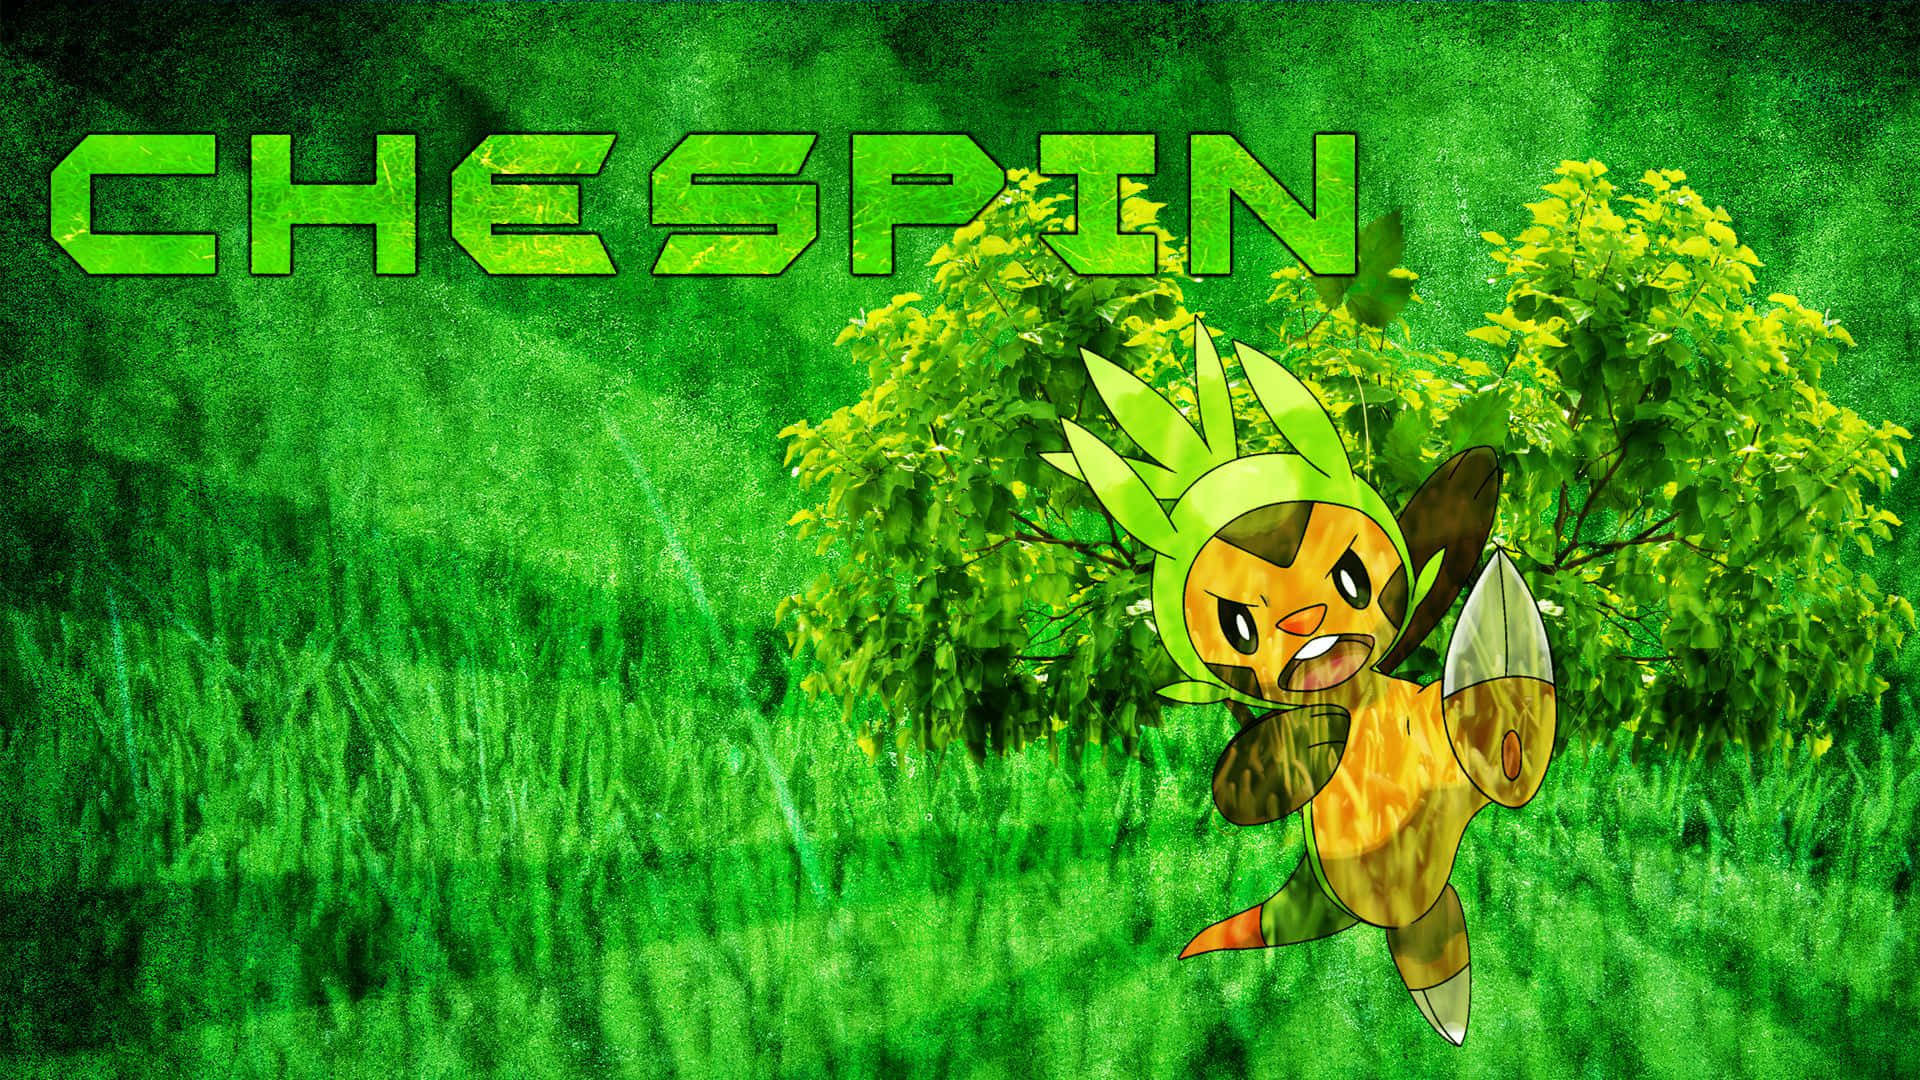 Chespinmot Gräset. (this Would Make Sense For A Wallpaper Featuring Chespin, A Pokémon, Surrounded By Grass.) Wallpaper